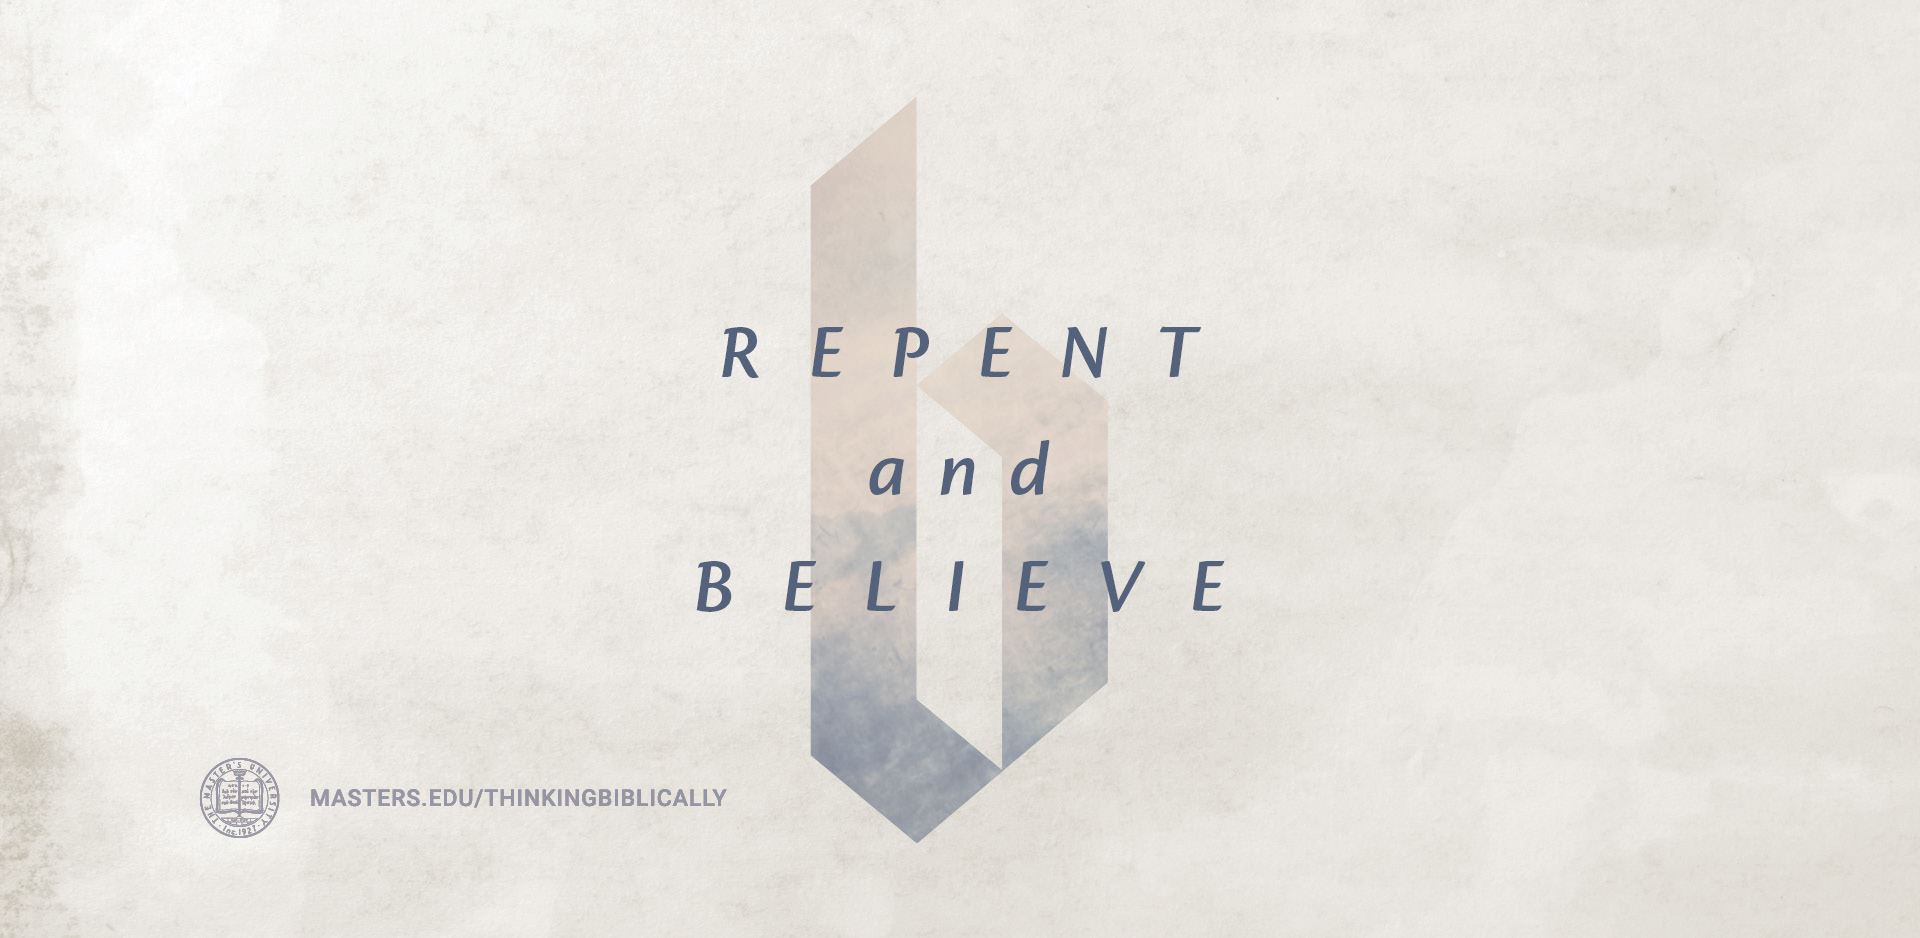 Repent and Believe - The Master's University